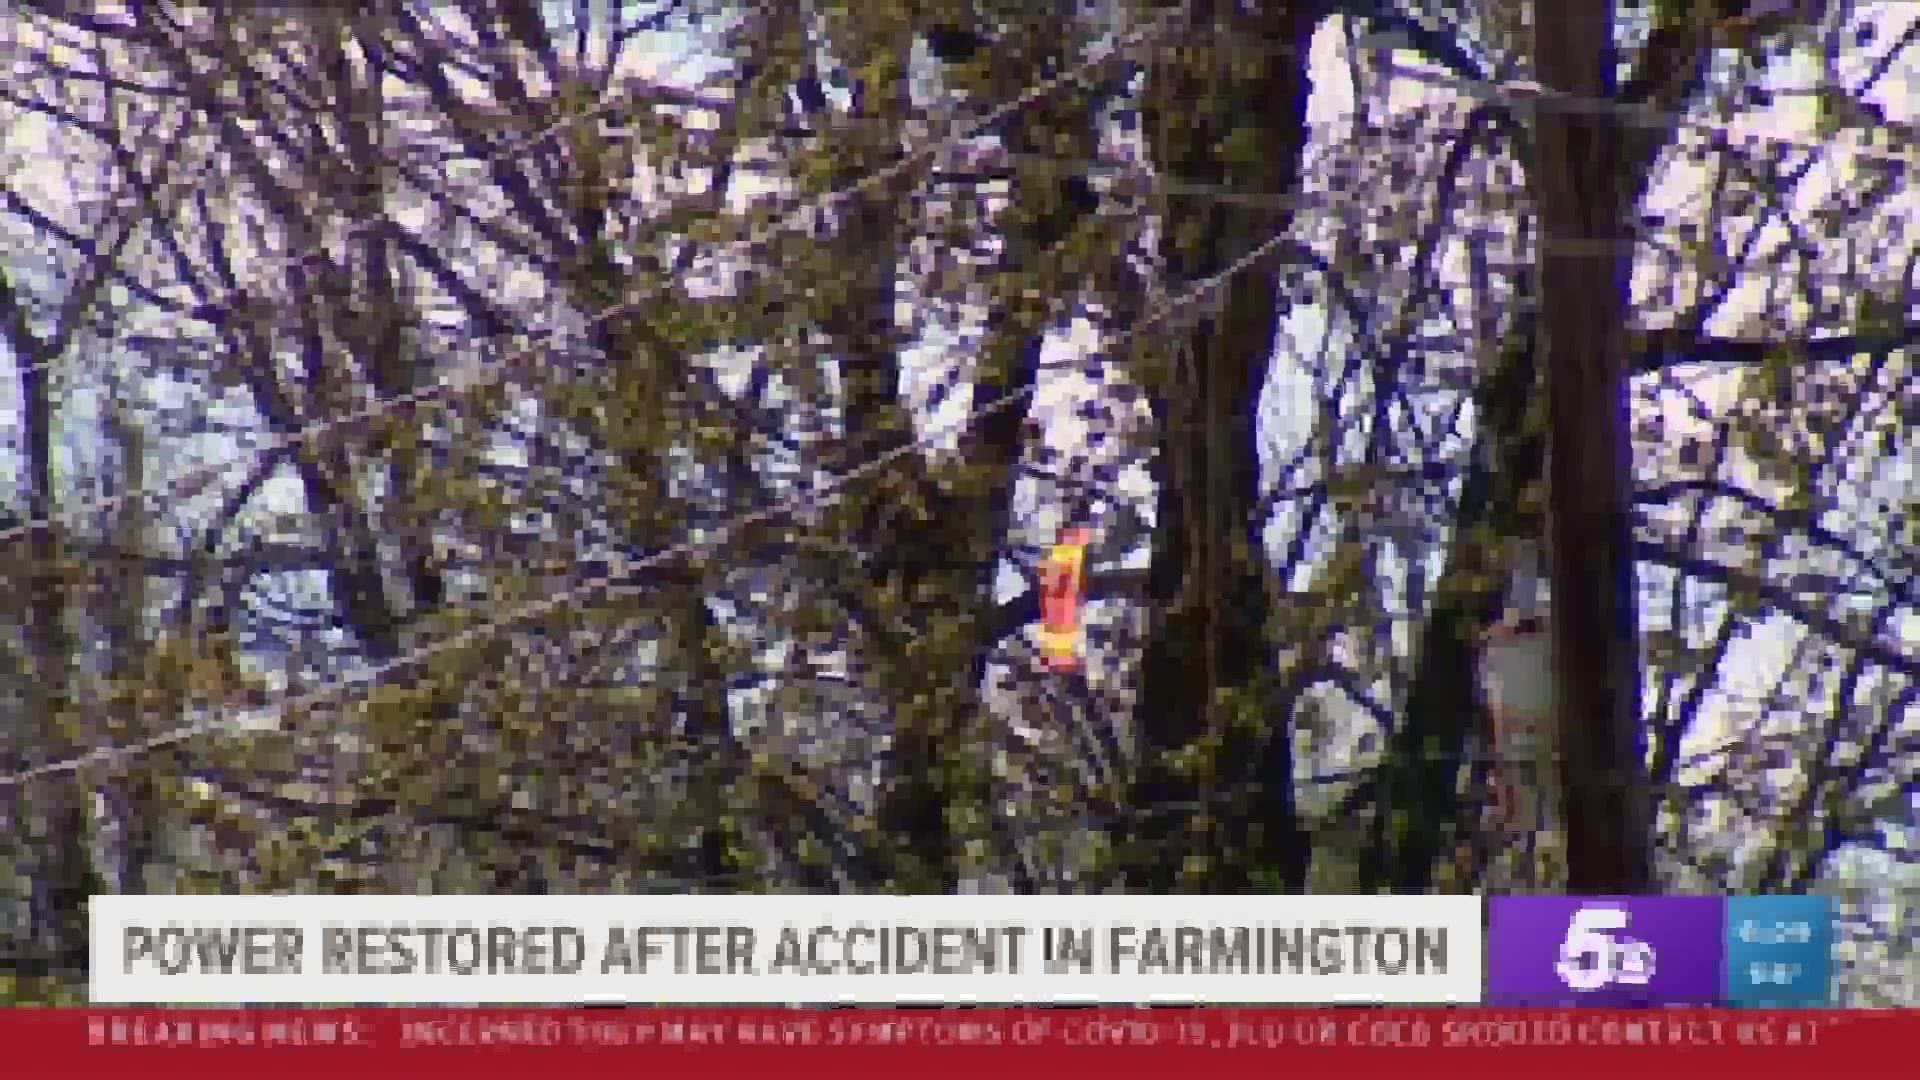 Power restored in Farmington after accident